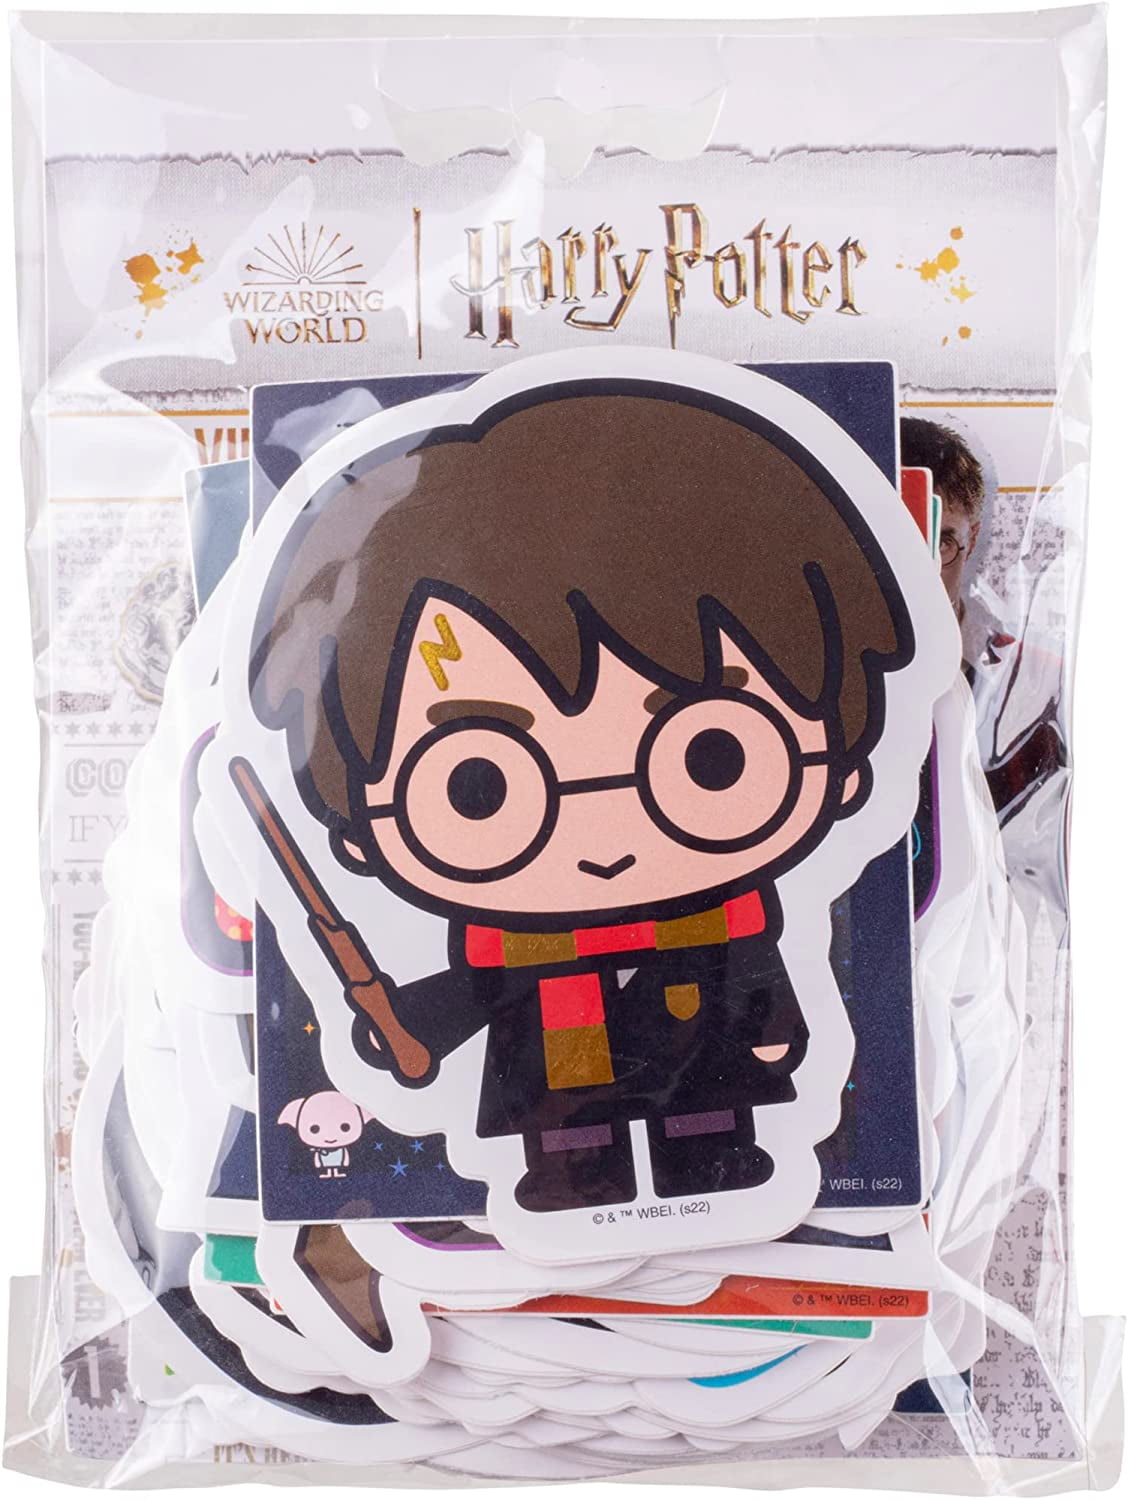 50pcs Harry Potter Officially Licensed Hogwarts Wizarding Animals Elves  Props Vinyl Stickers Waterproof Gift Cartoon Water Bottle Laptop Bumper Bottle  Water Bottle Computer Cell Phone Hard Gift Hat Car And Stickers